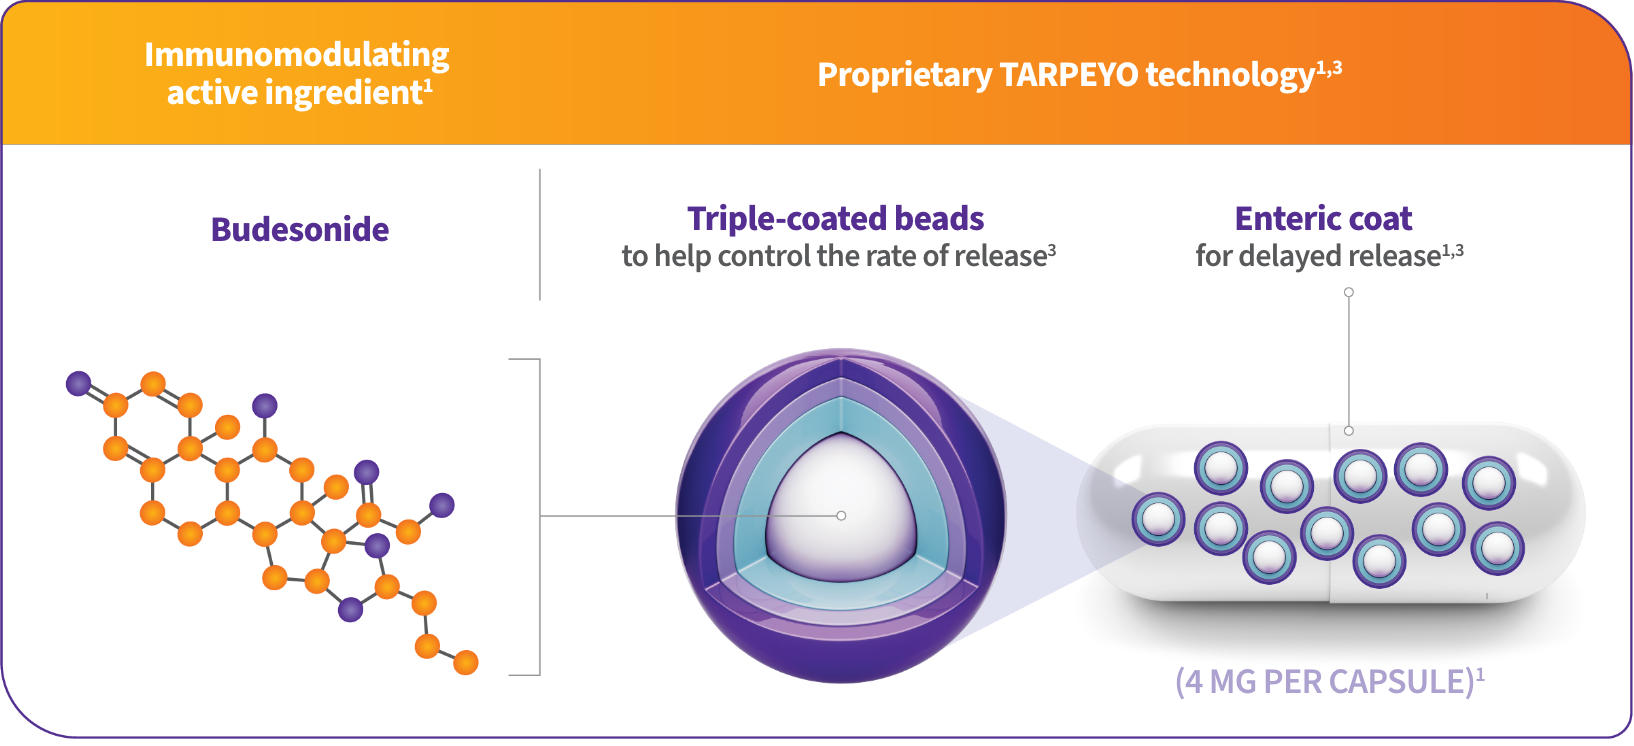 The chart describes the delayed-release technology of Tarpeyo and their coats